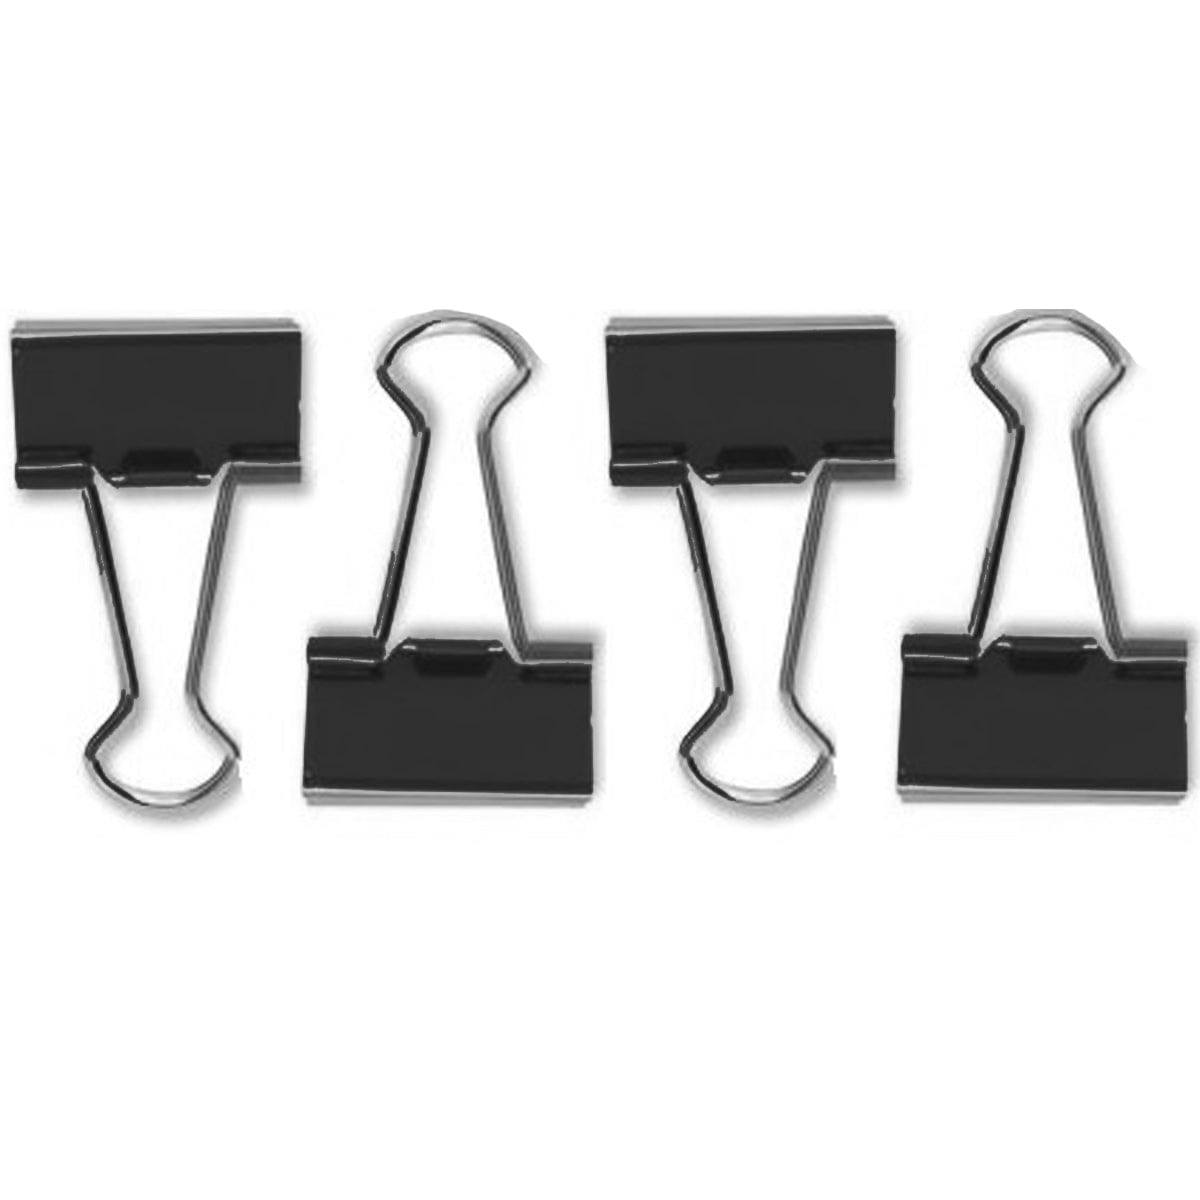 Four black binder clips for use with C&C guinea pig cages